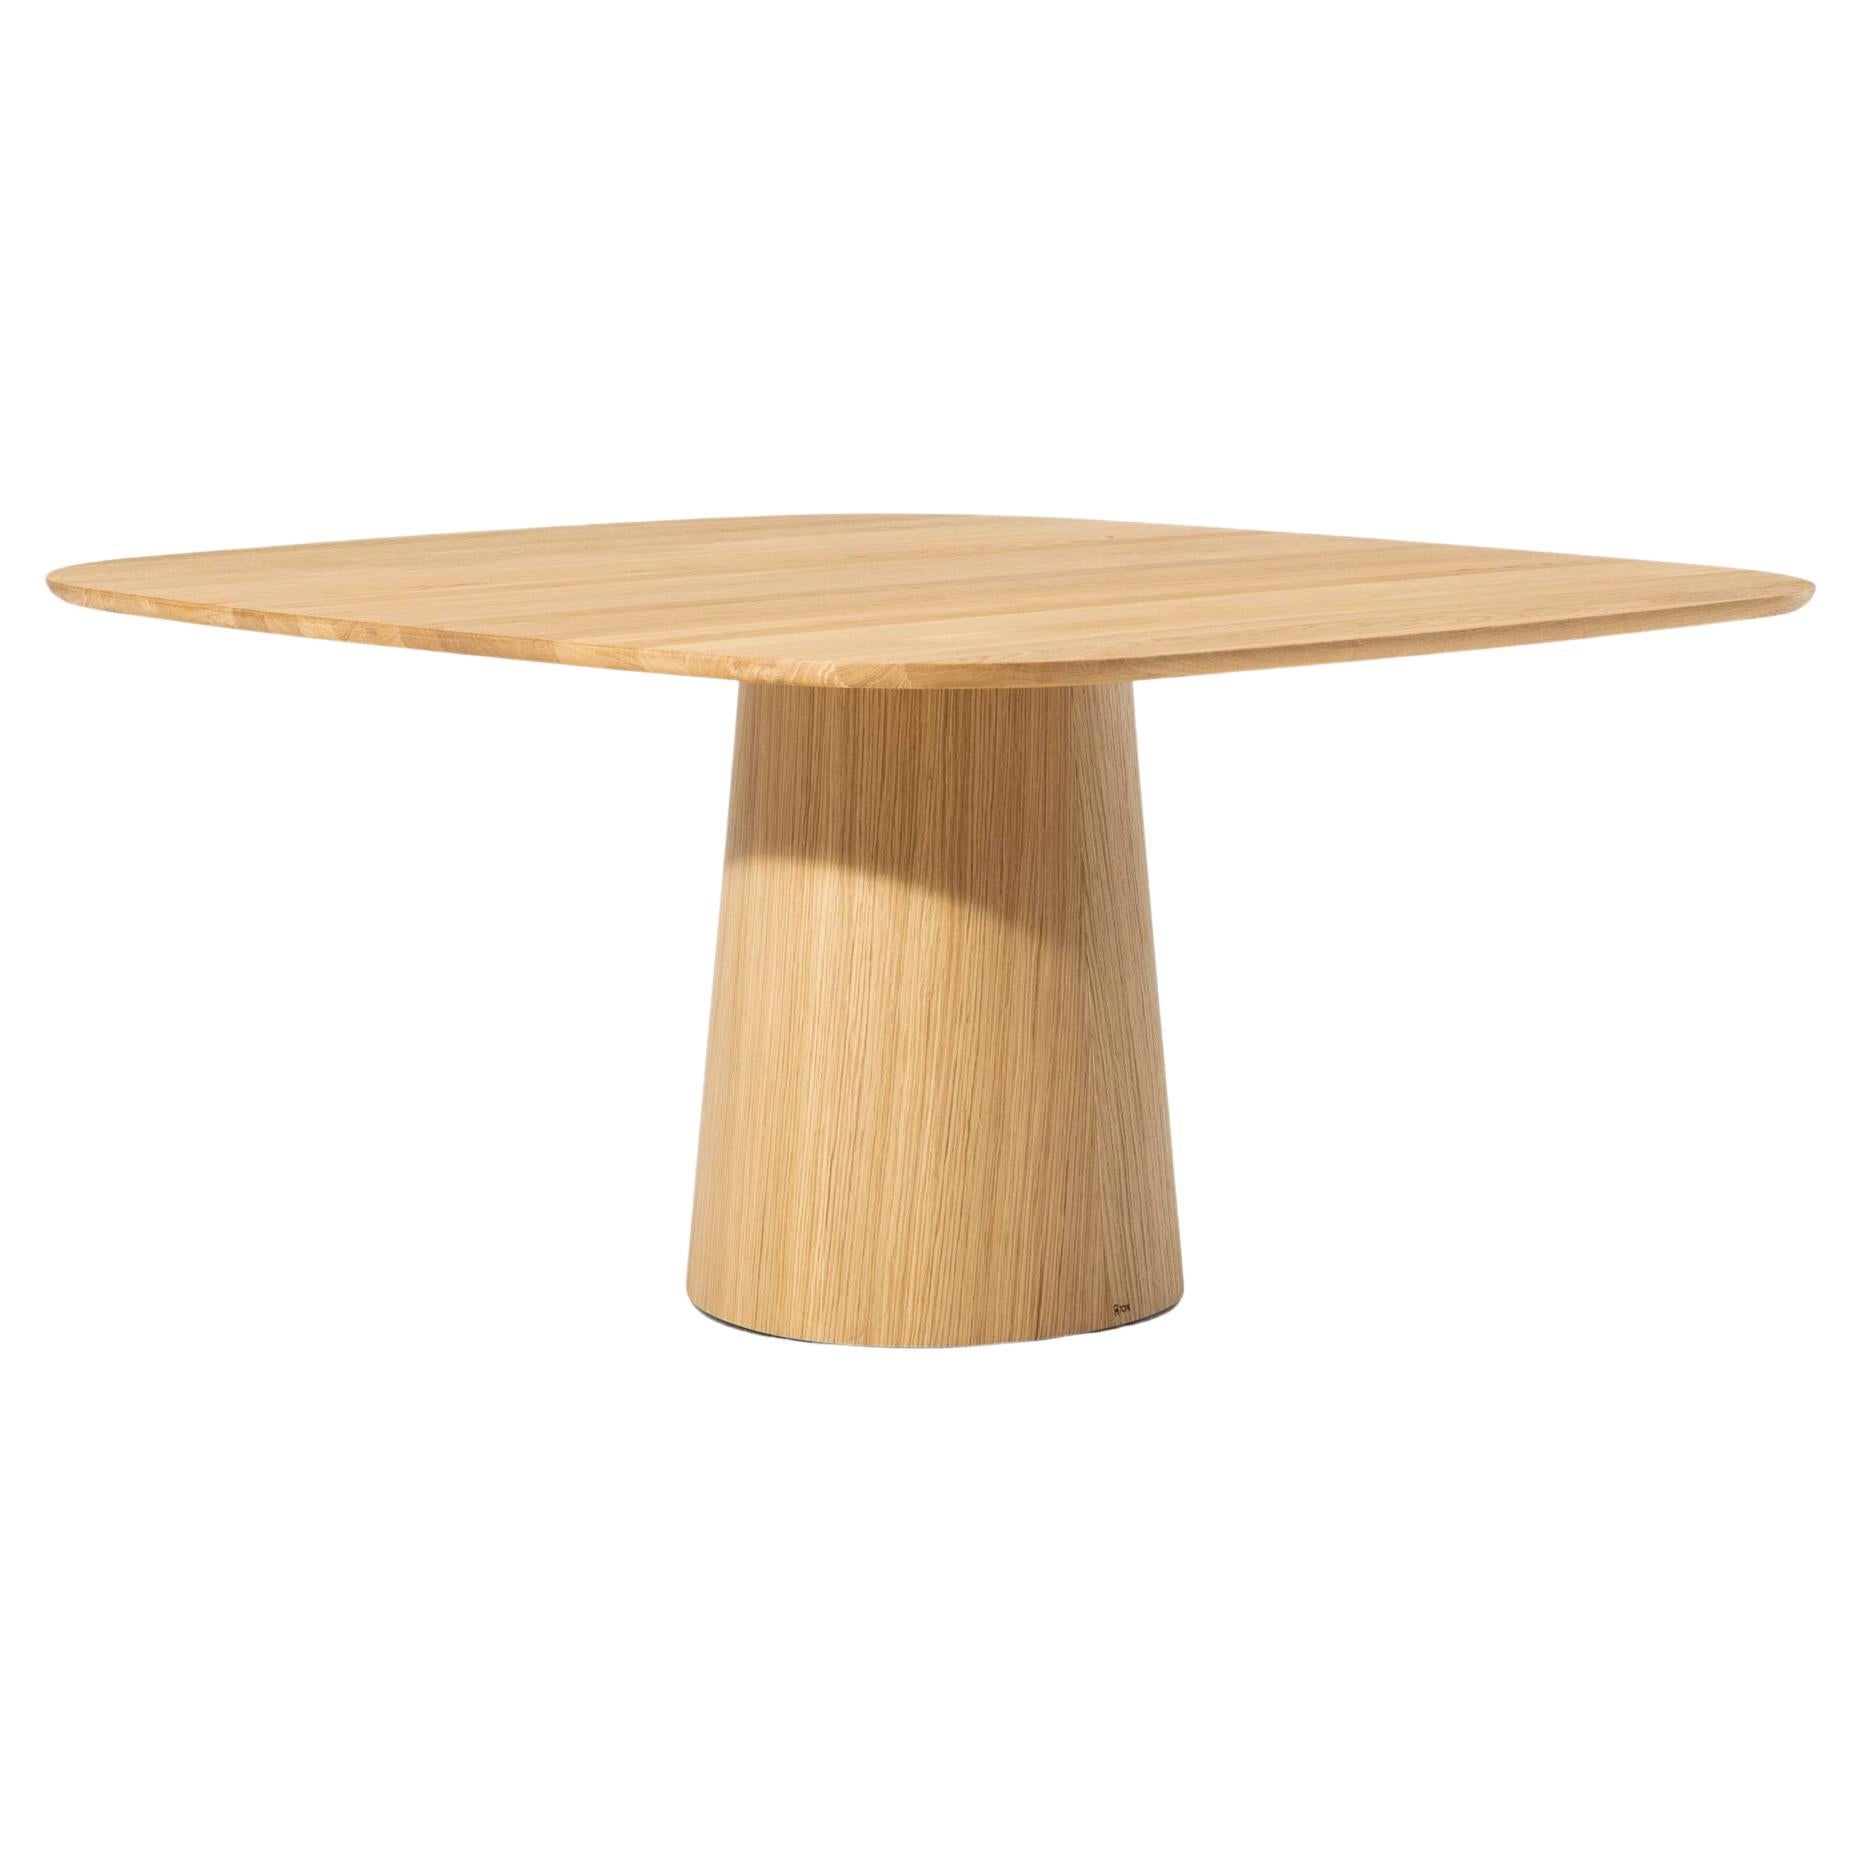 Contemporary Dining Table POV 462, Solid Oak or Walnut, Round or Square, 140 For Sale